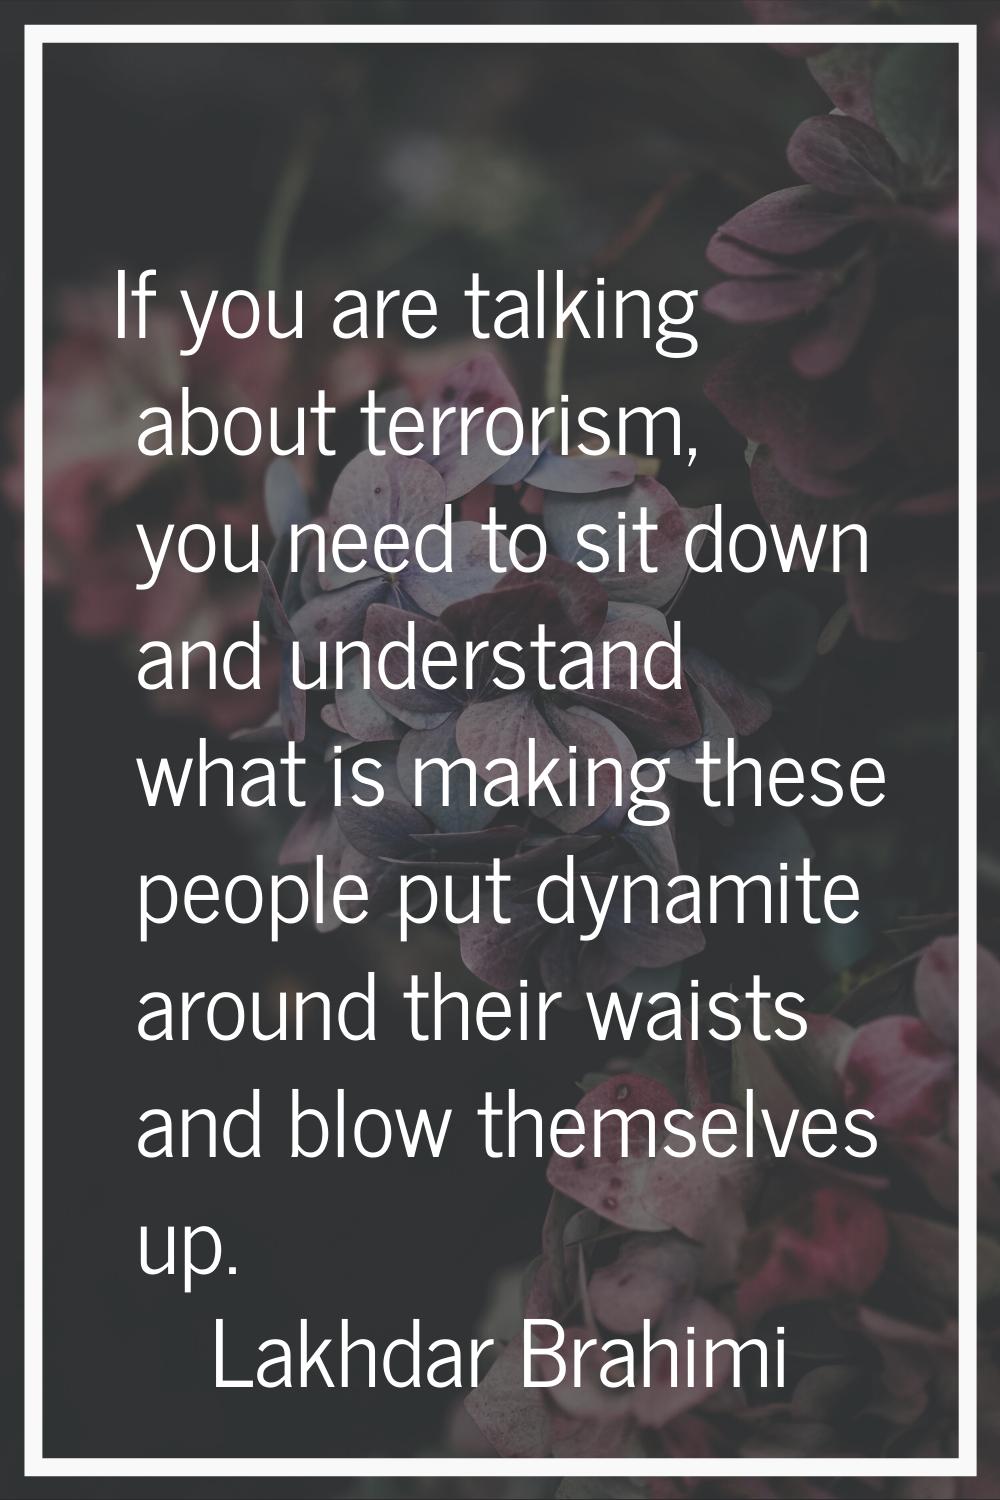 If you are talking about terrorism, you need to sit down and understand what is making these people